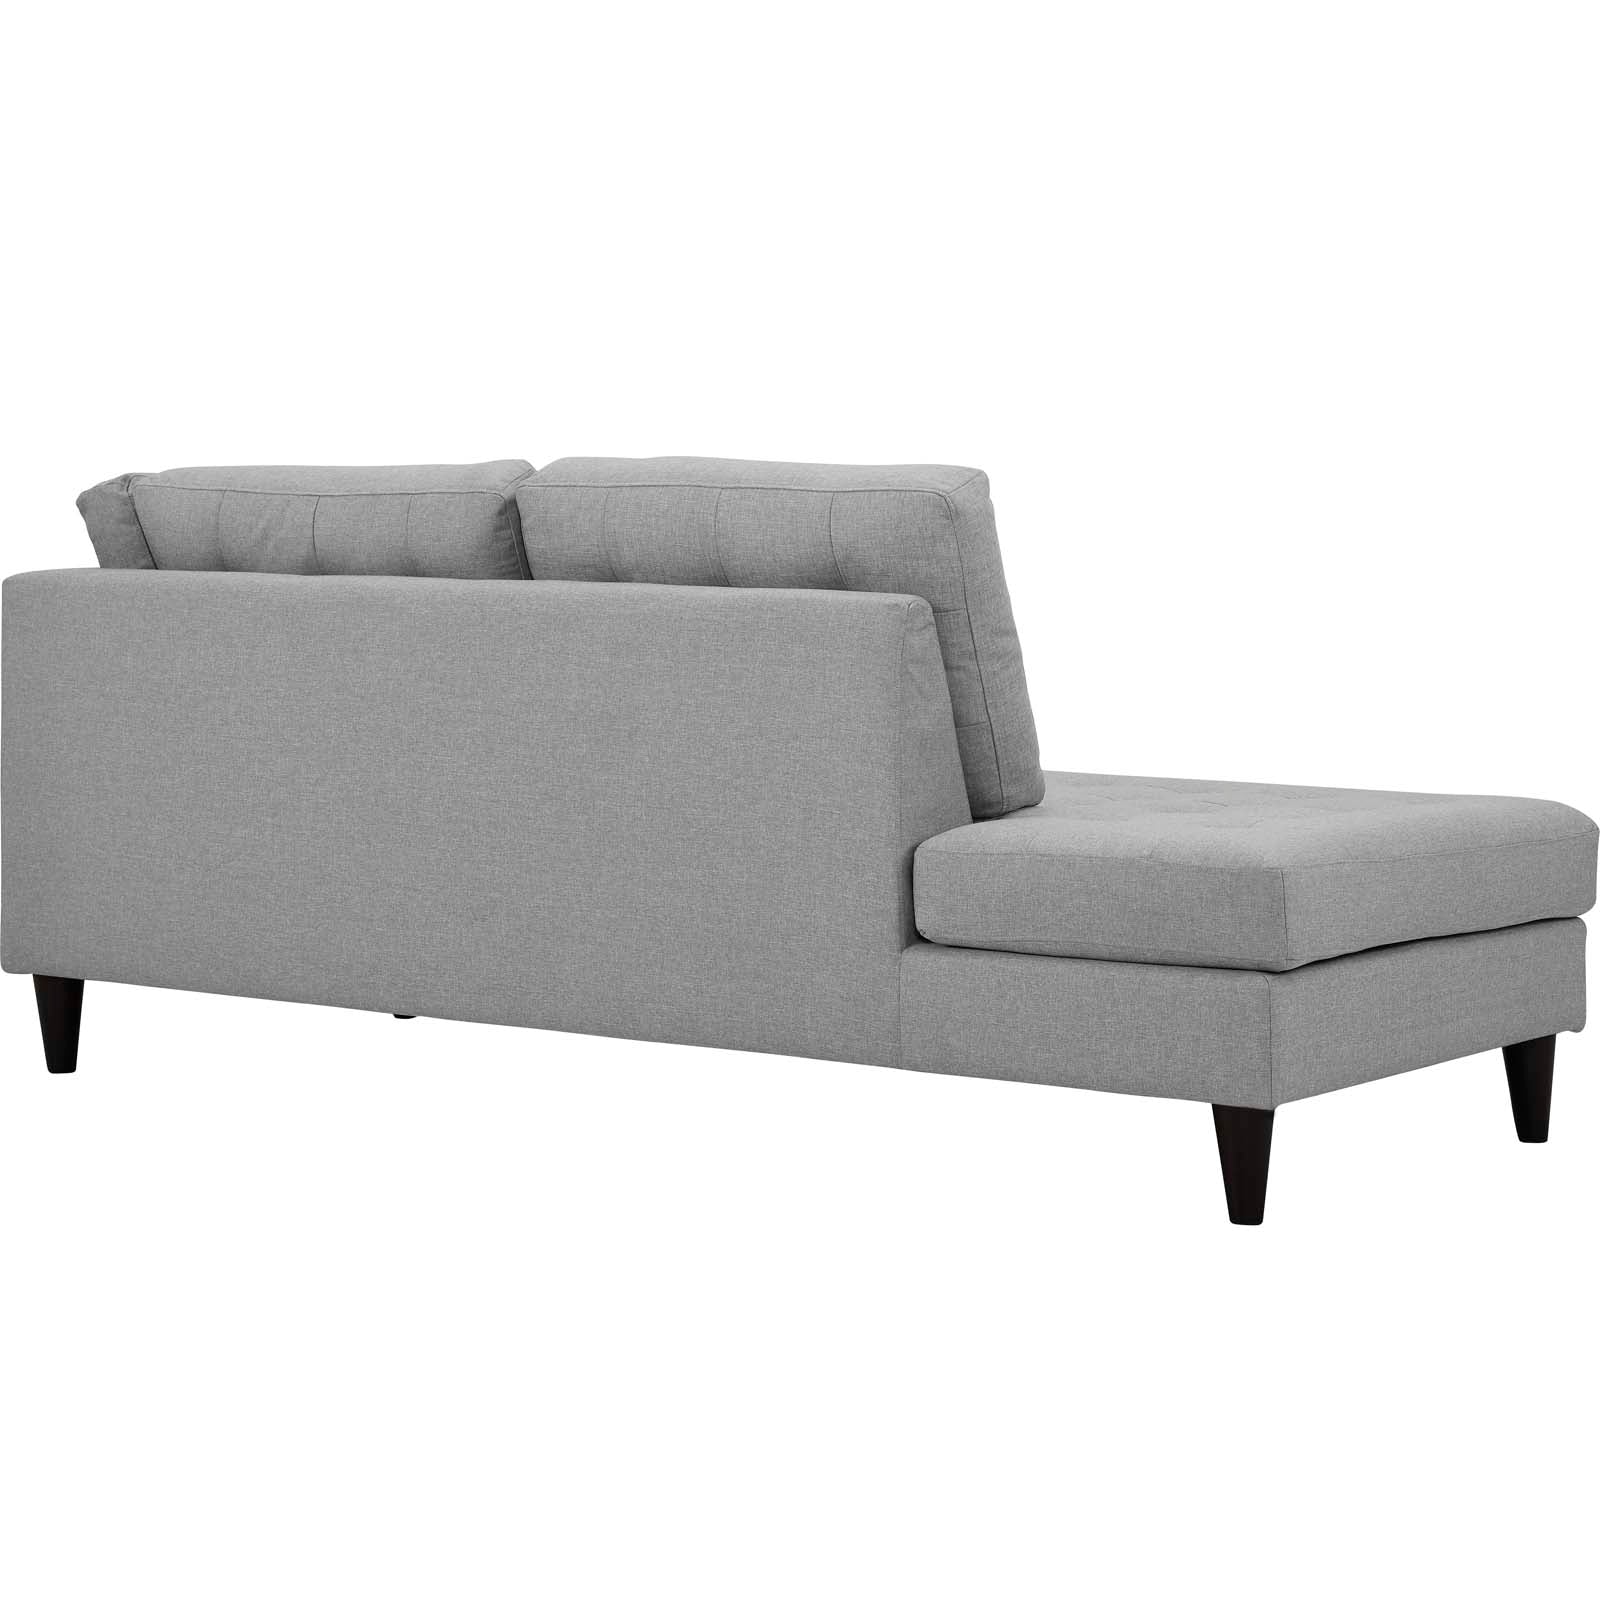 Modway Sofas & Couches - Empress Upholstered Fabric Left Facing Bumper Light Gray